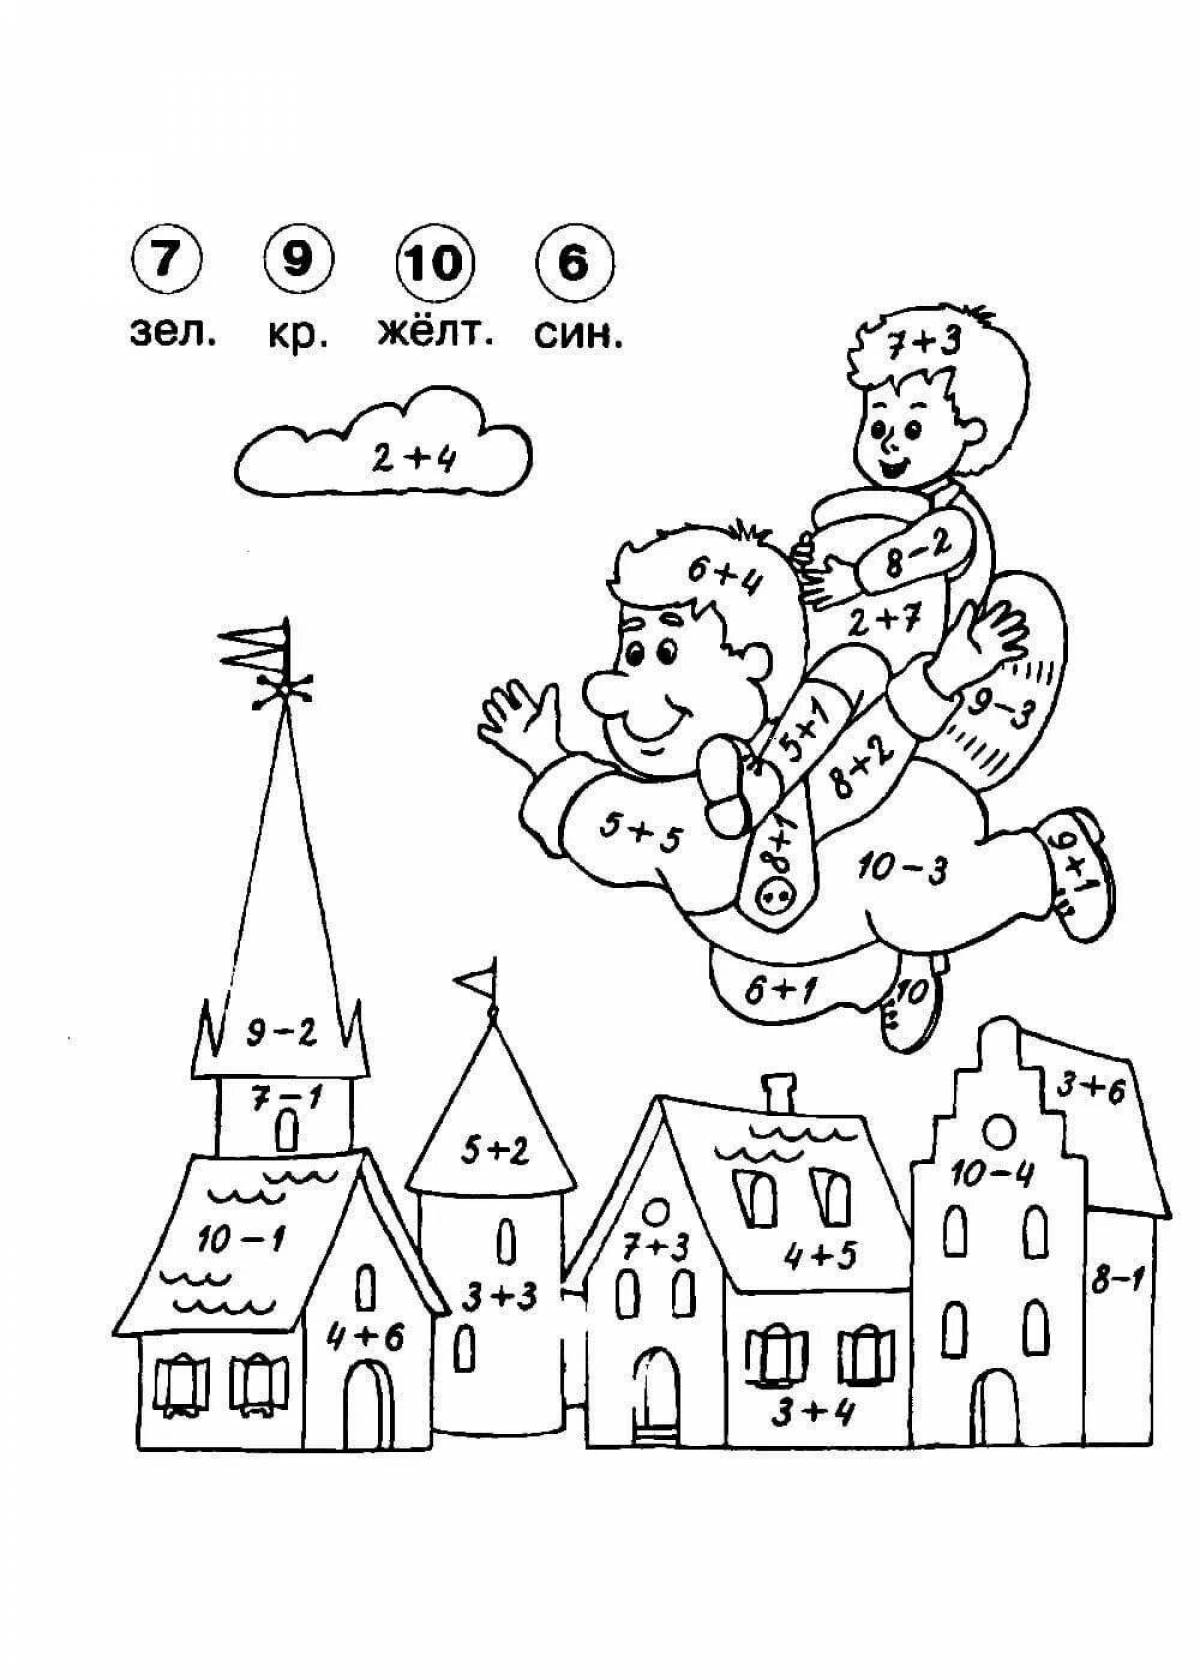 Stimulating math coloring pages for 6-7 year olds